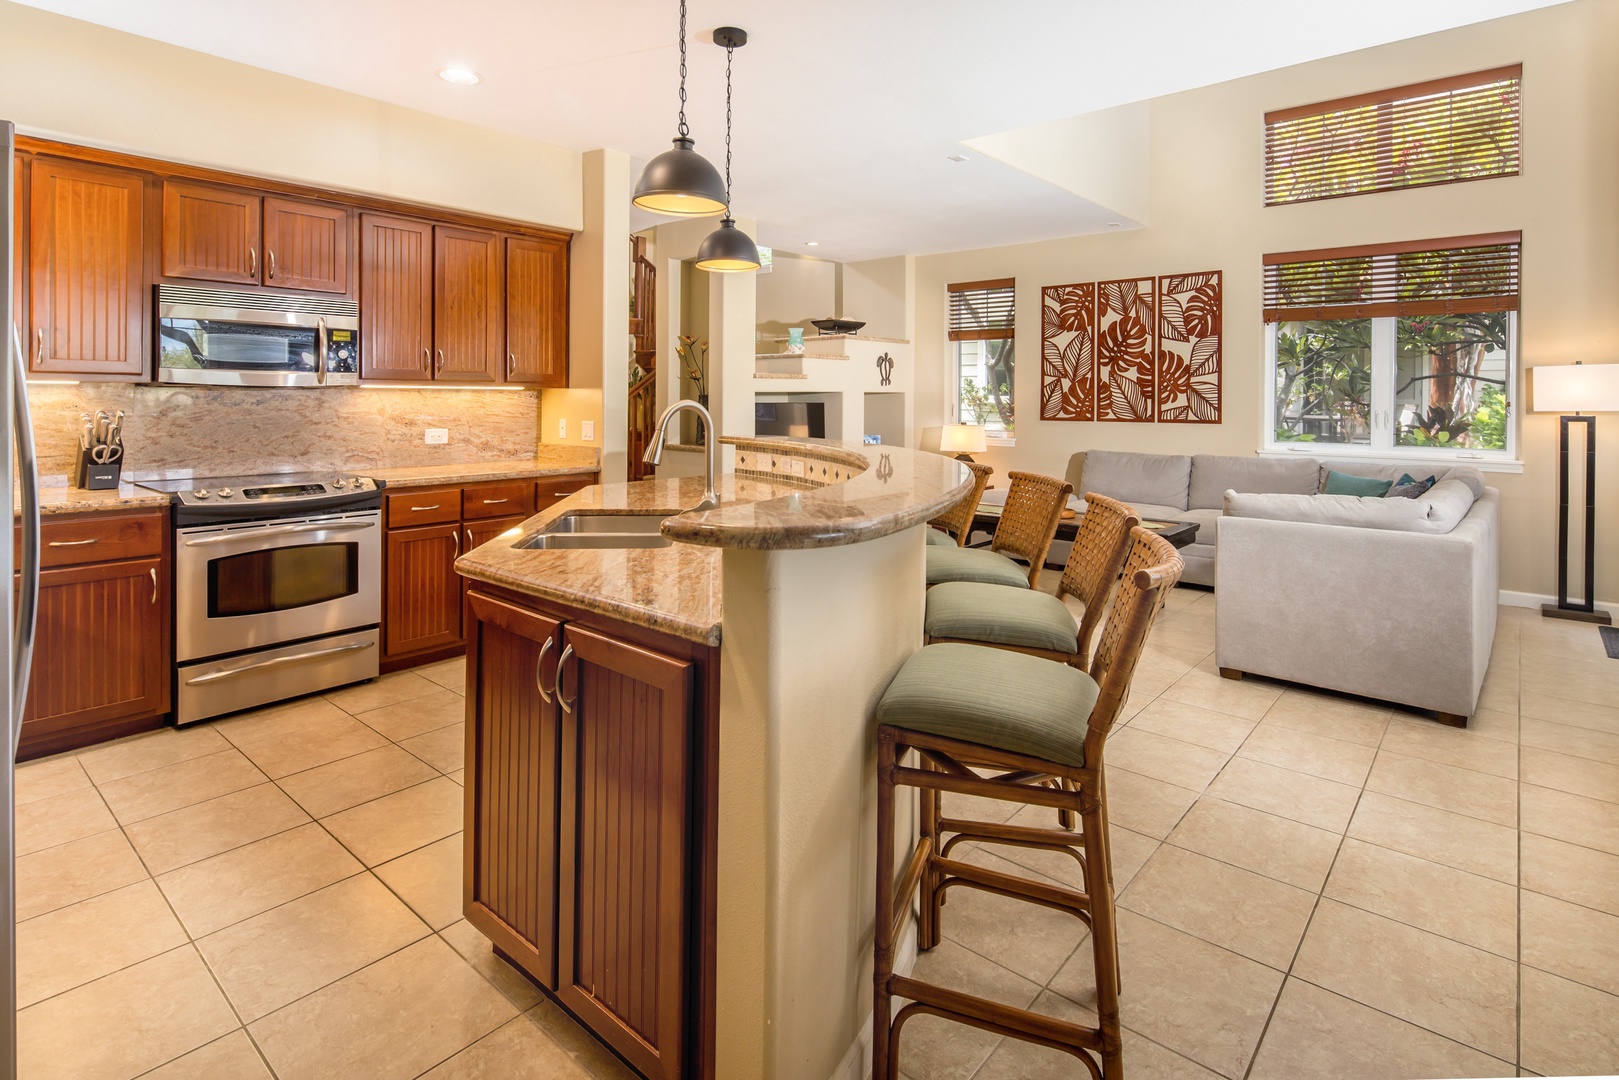 Well-appointed kitchen with all the essentials and counter seating